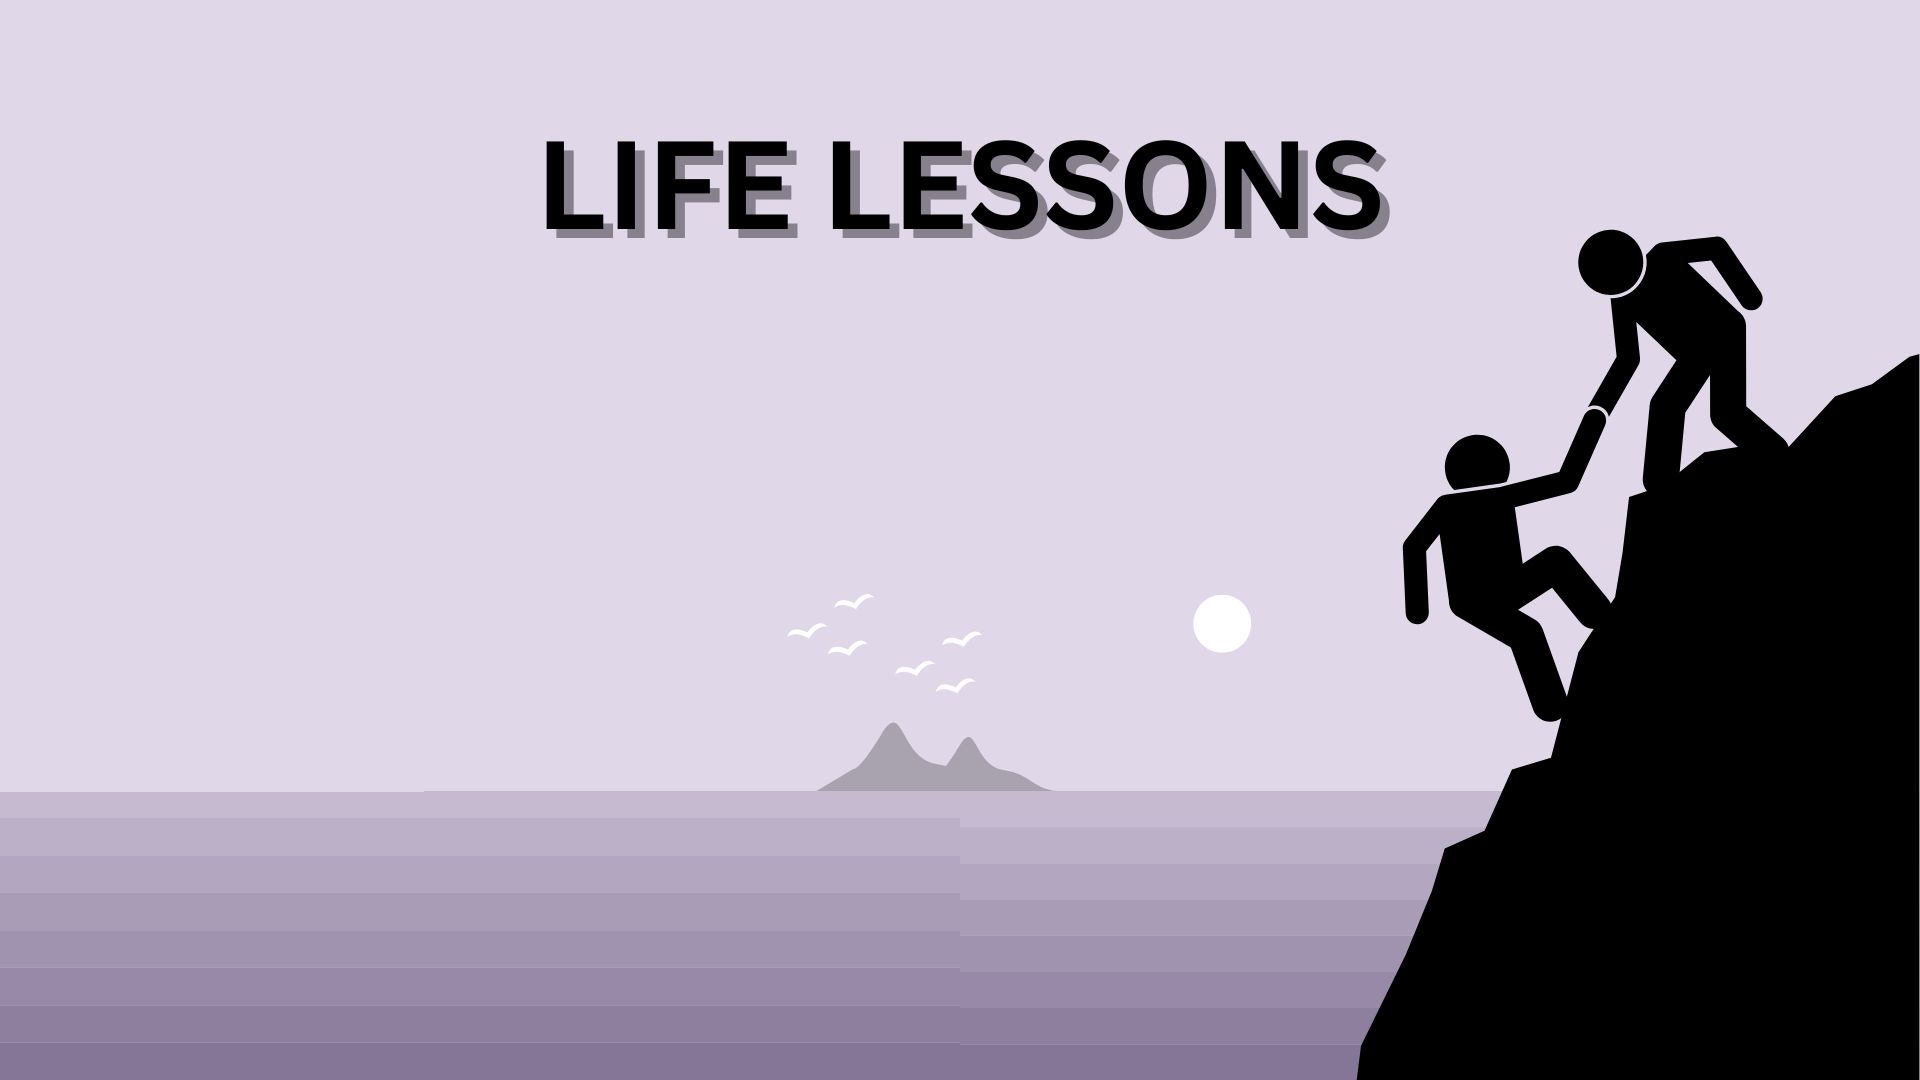 LIFE LESSONS